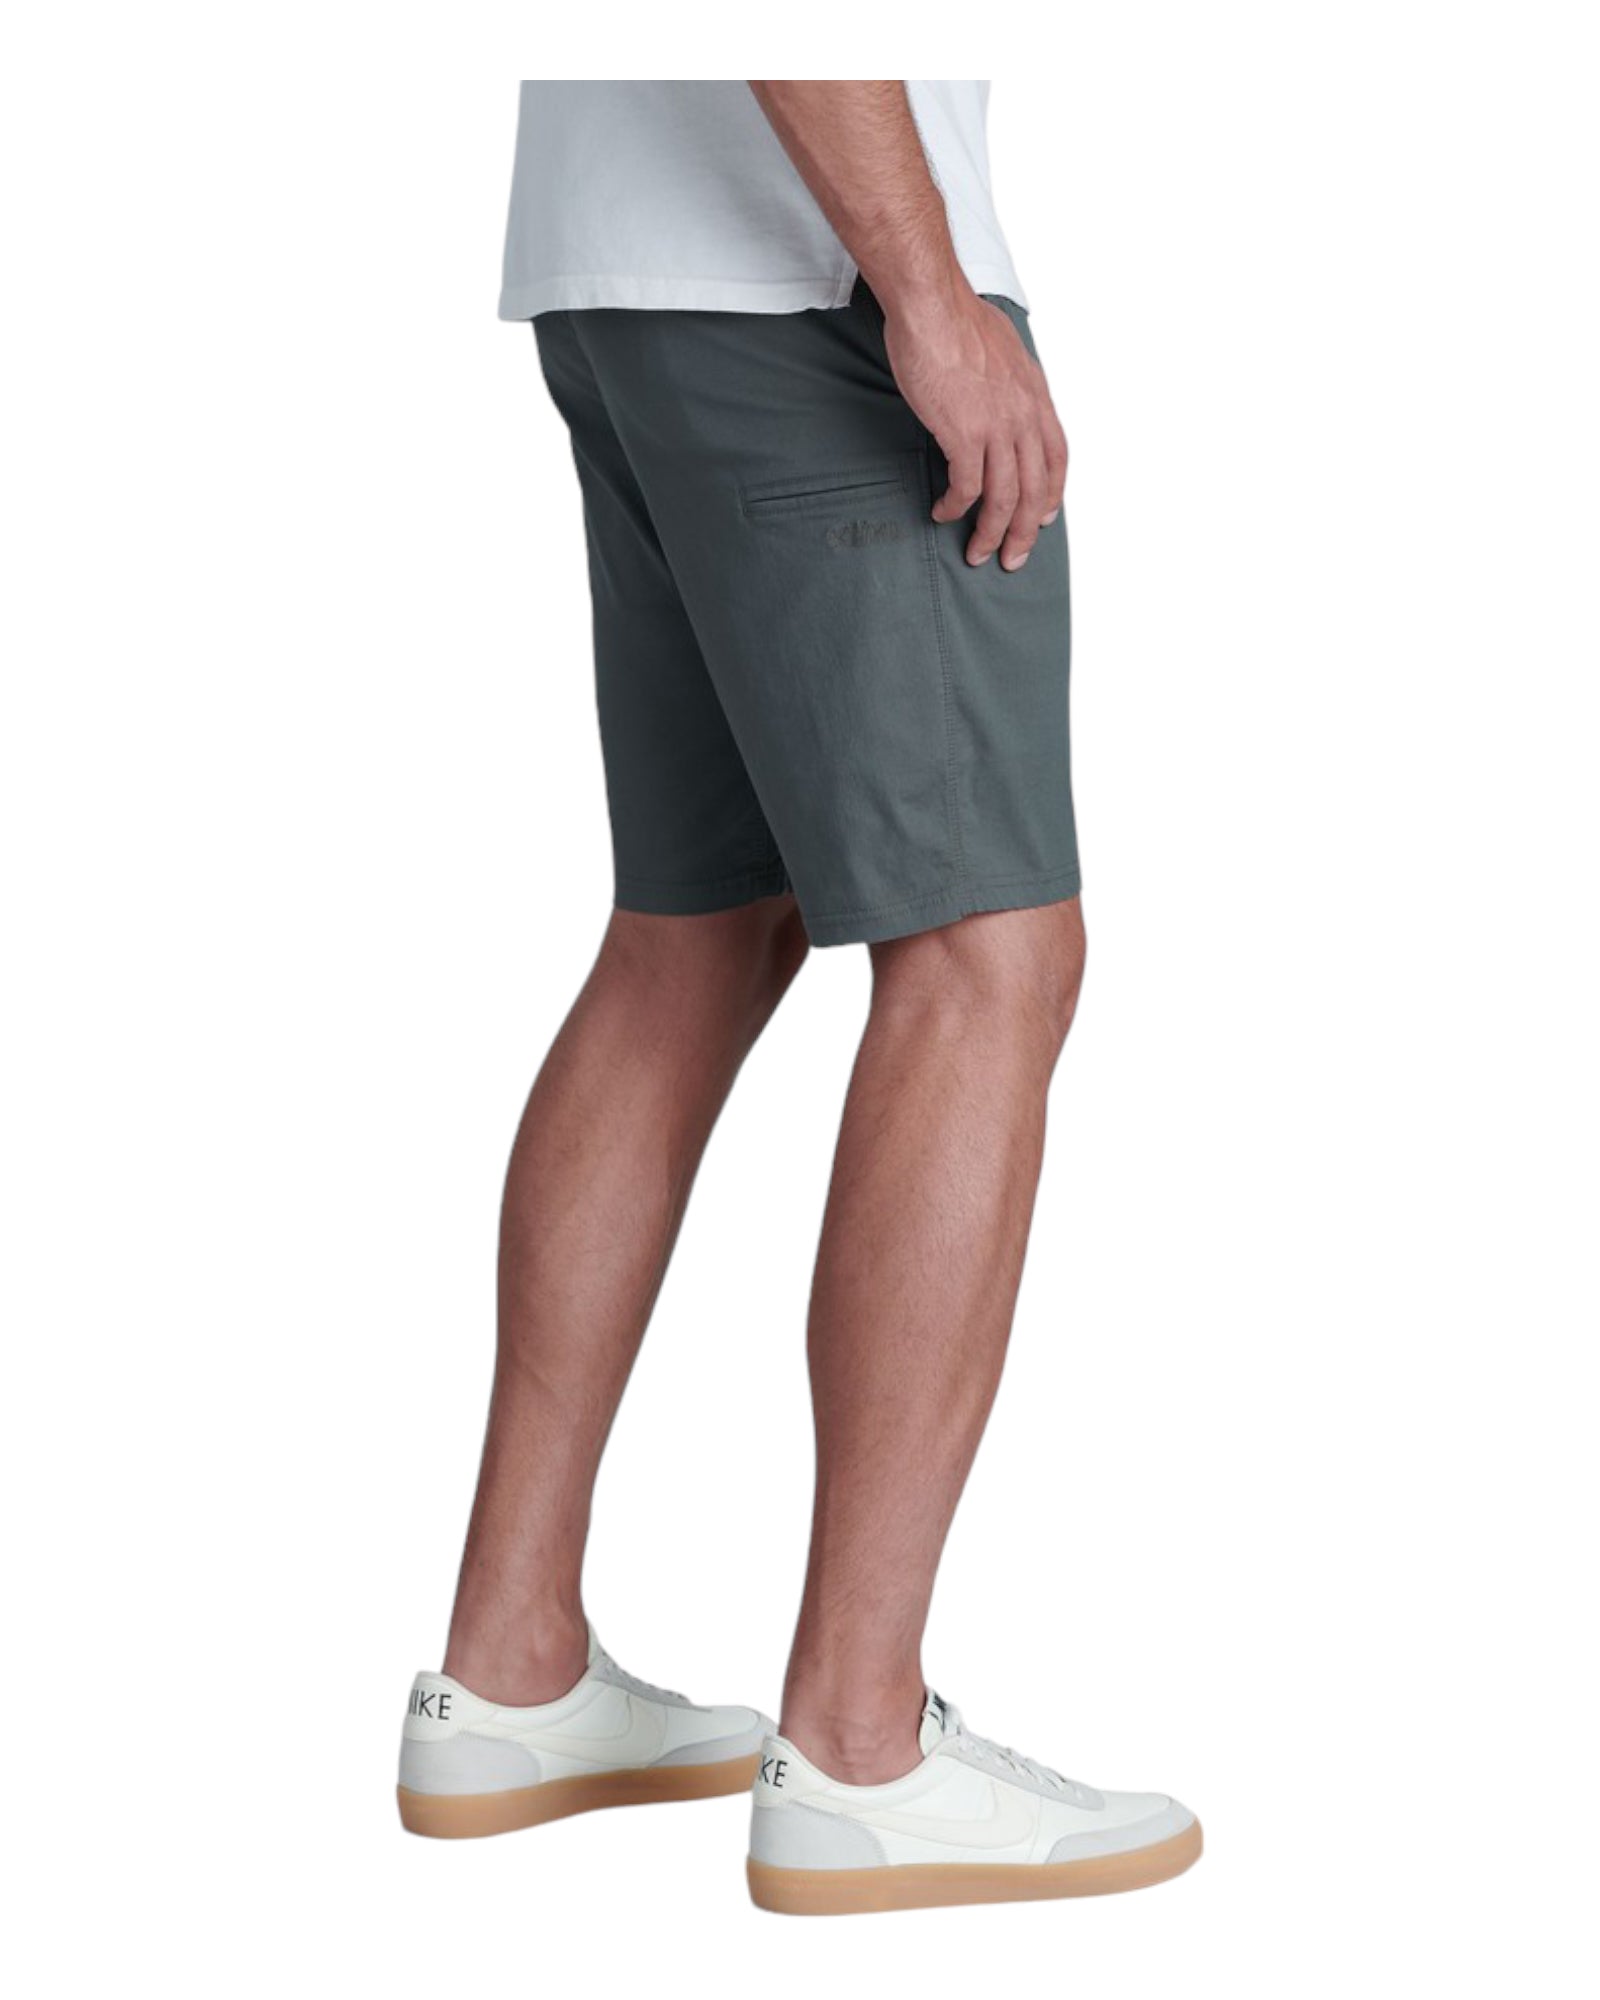 Designed to feel weightless, the RESISTOR LITE CHINO Short is ideal for the dog days of summer.